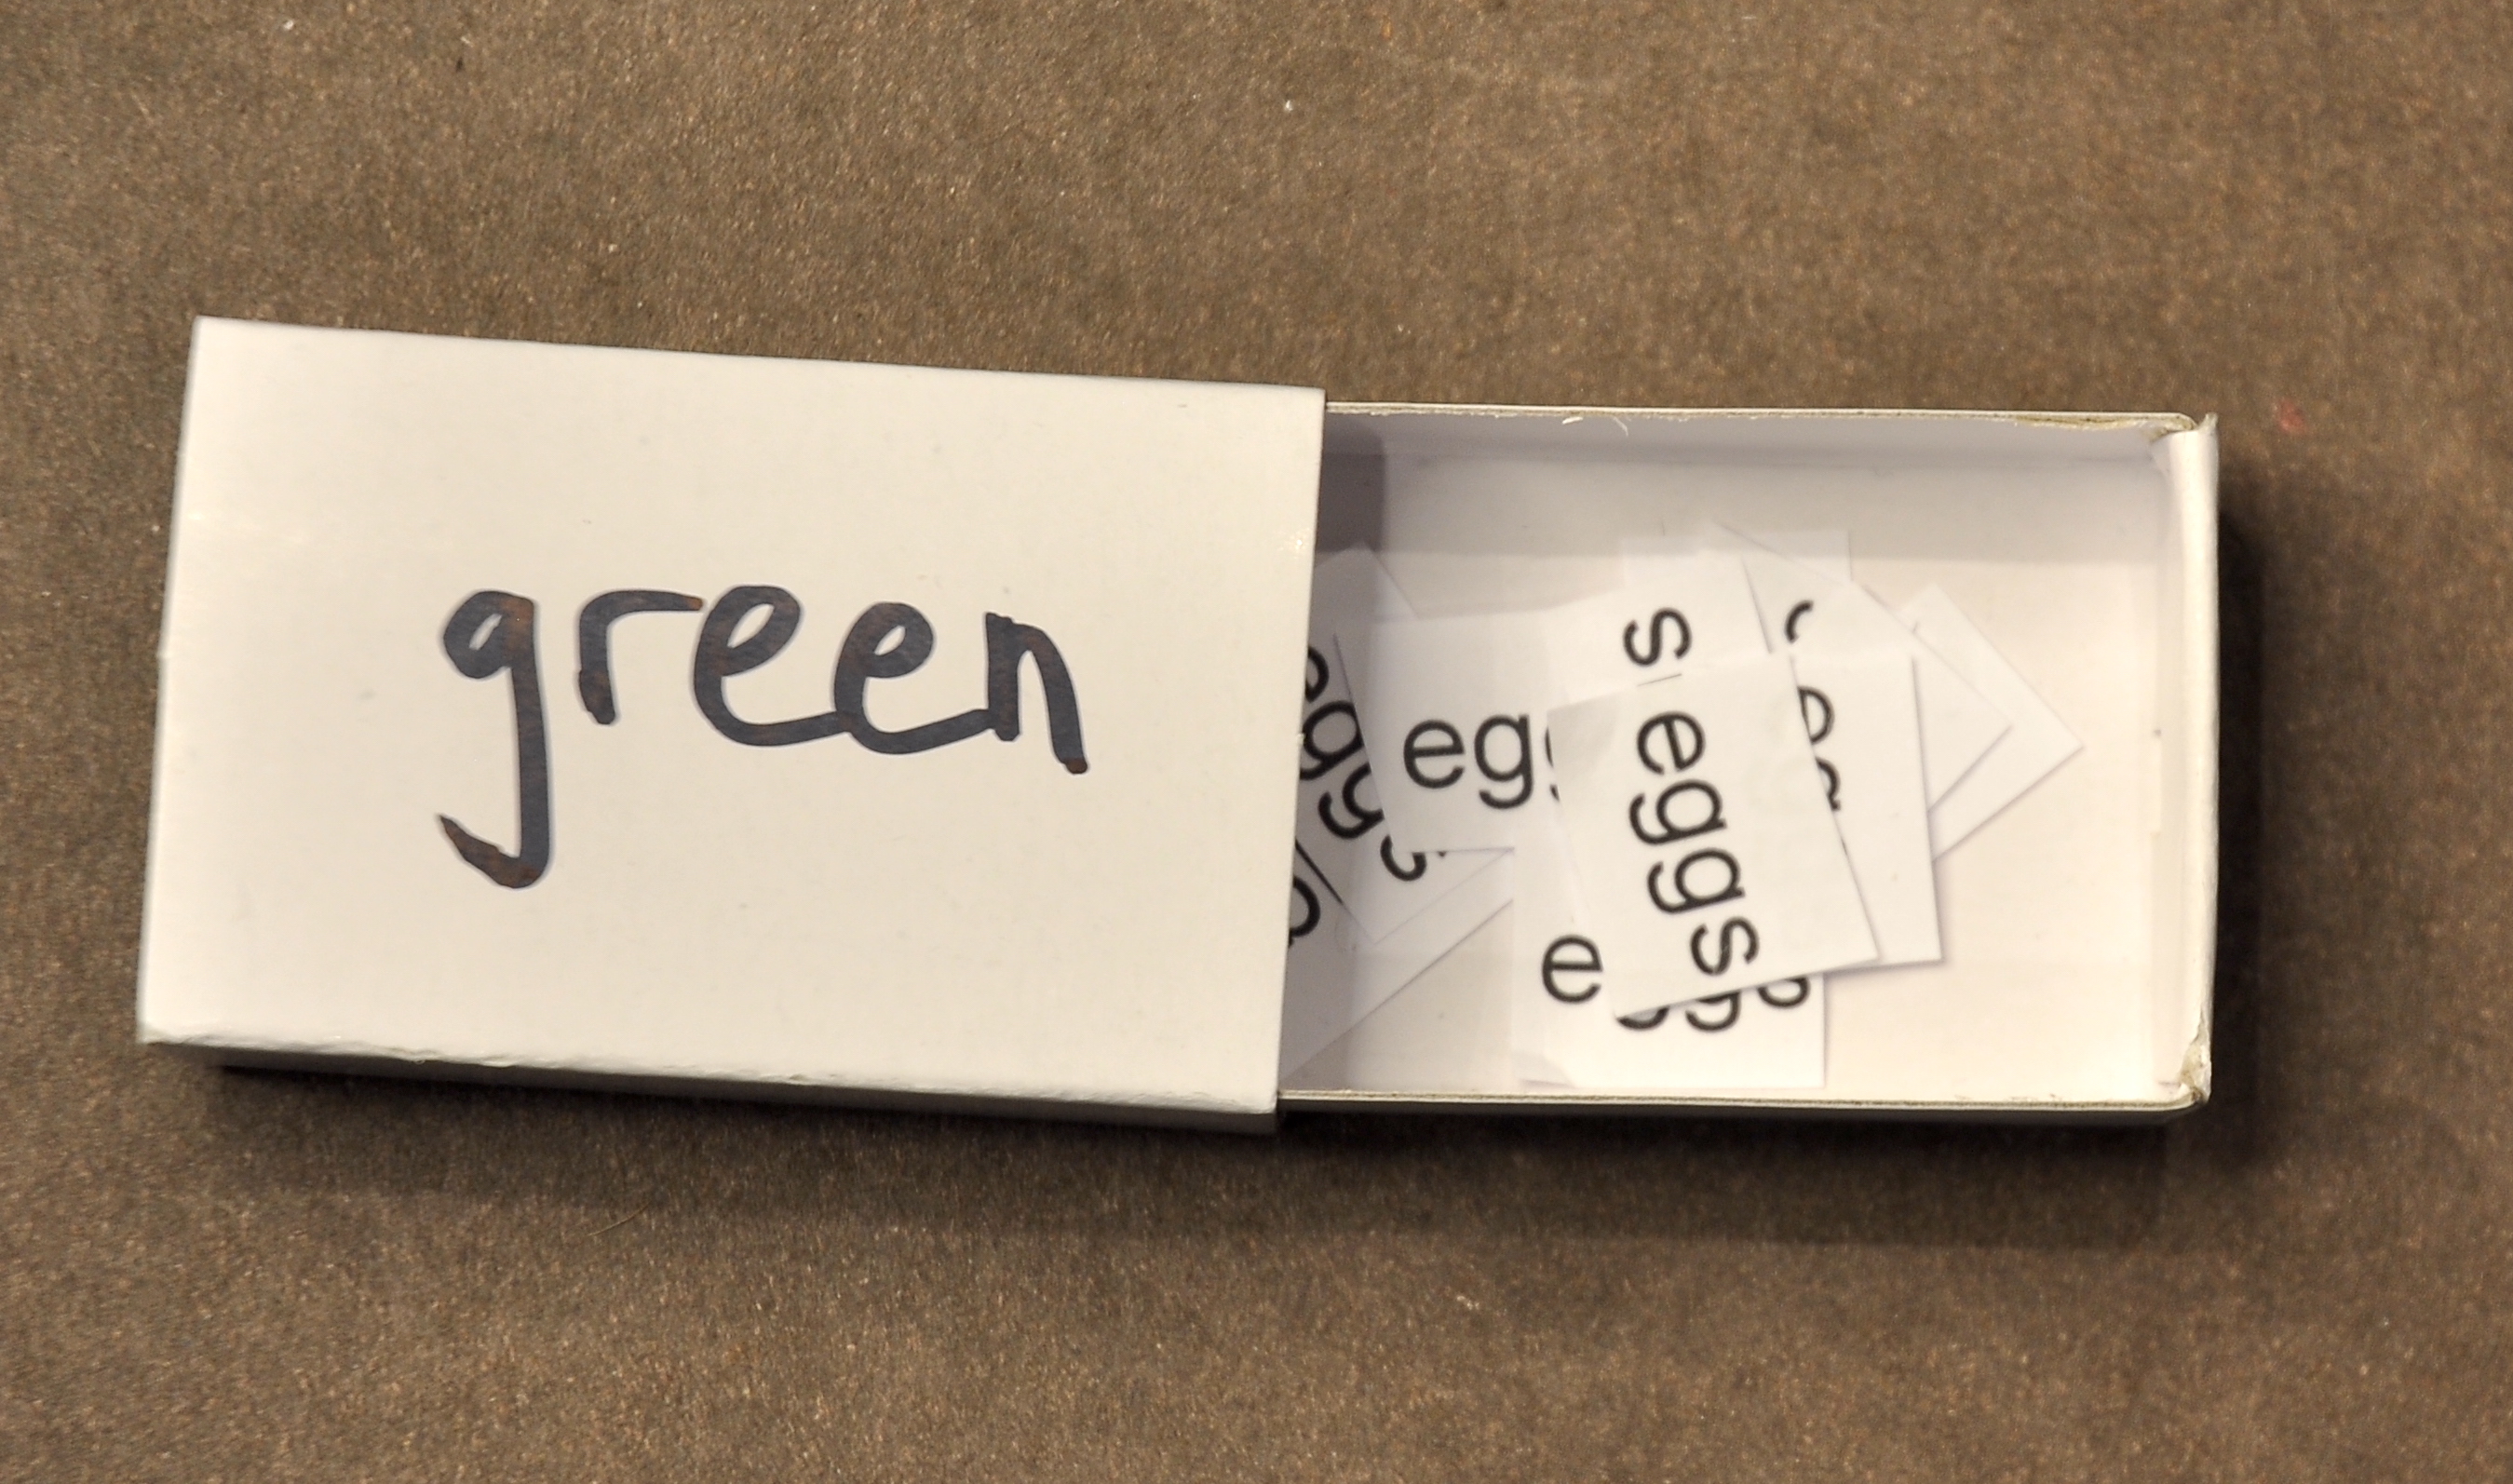 a matchbox with the word 'green' written on top, open to show the word eggs on multiple slips of paper